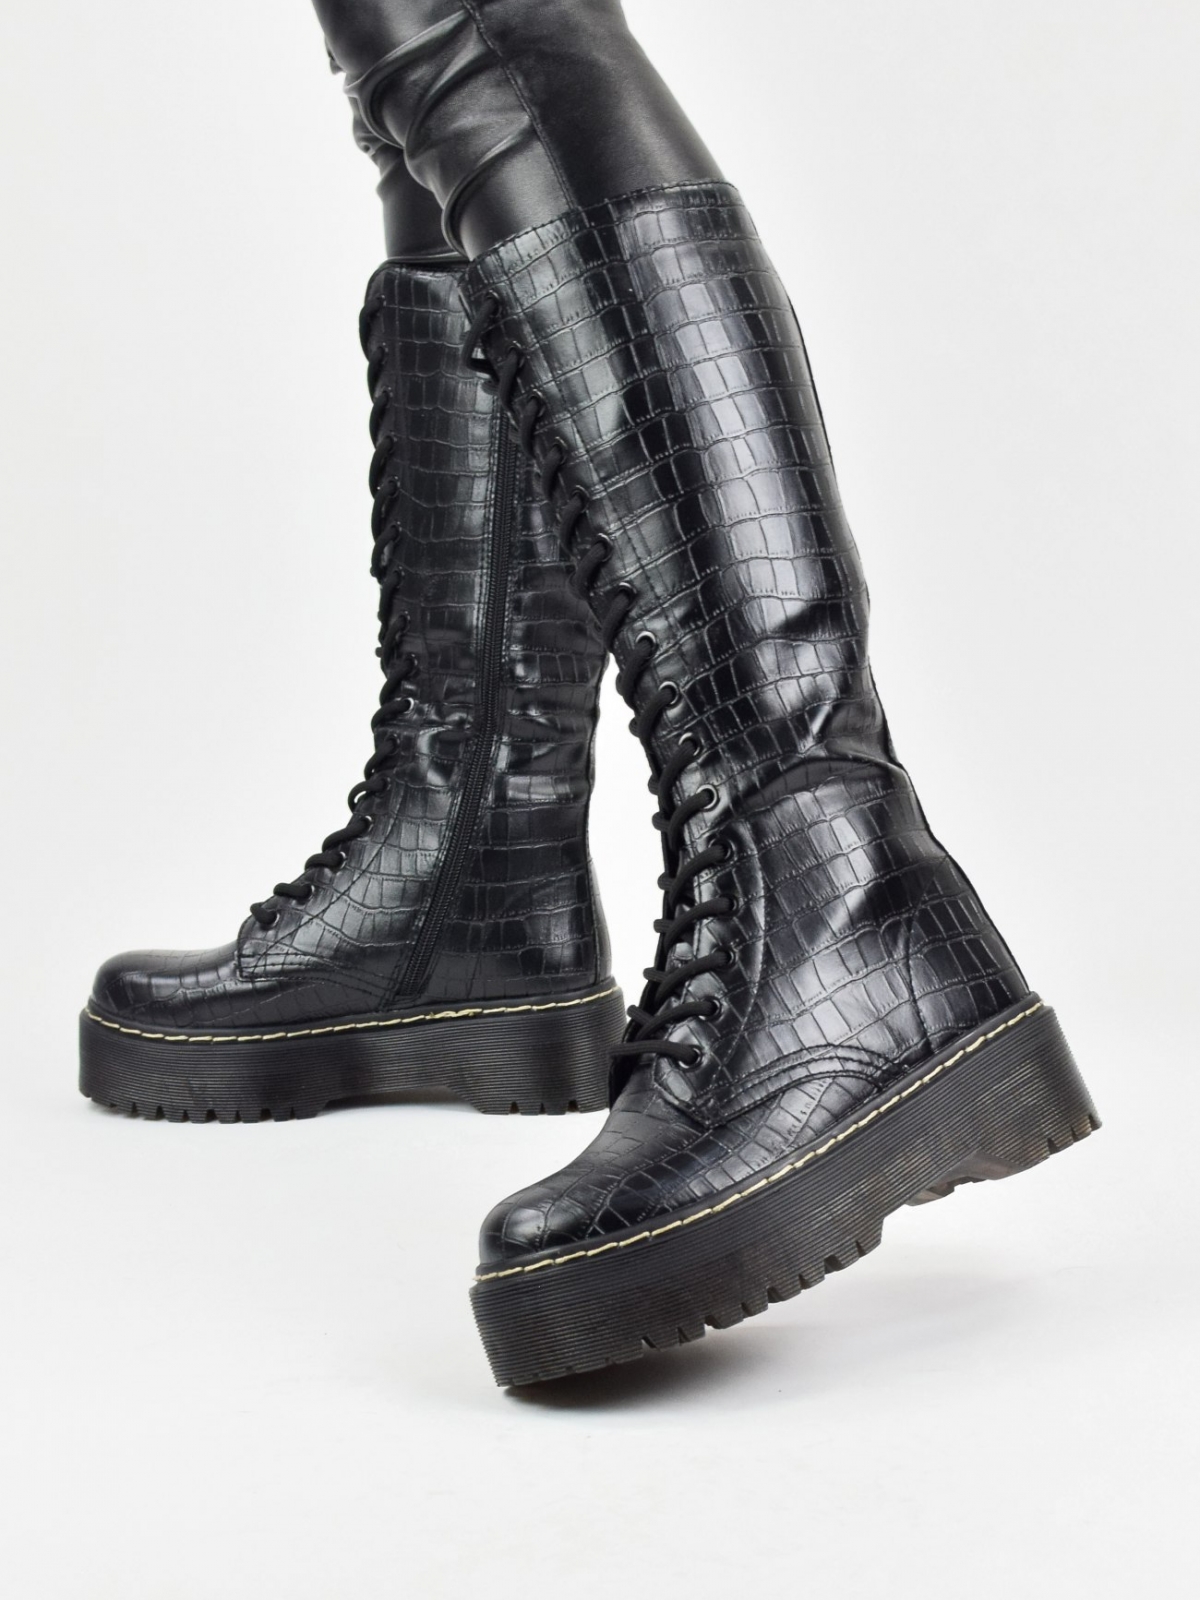 Modern design high boots with animal skin pattern in black